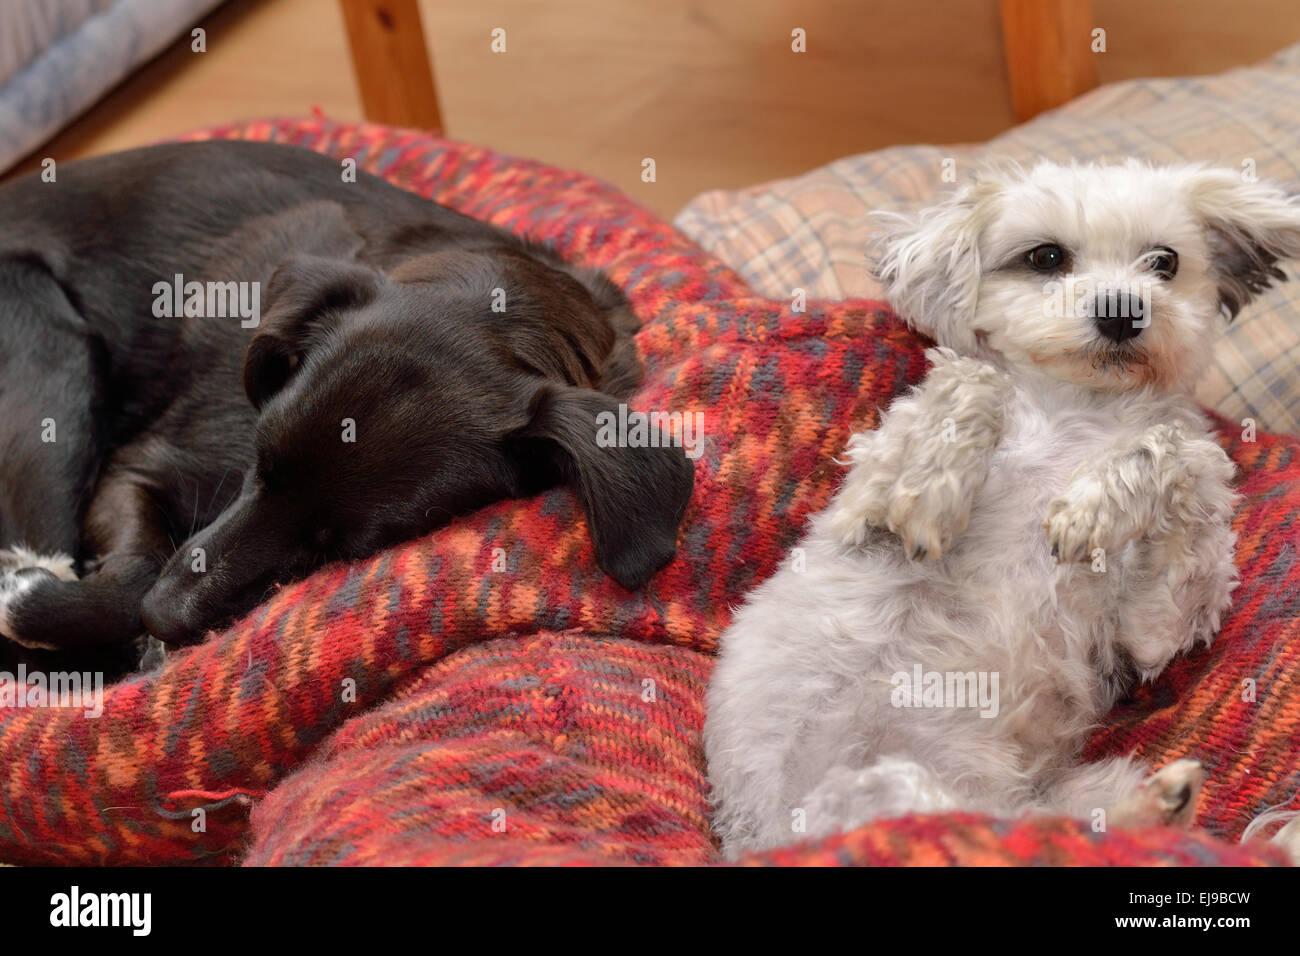 Two dogs are in the dog bed Stock Photo